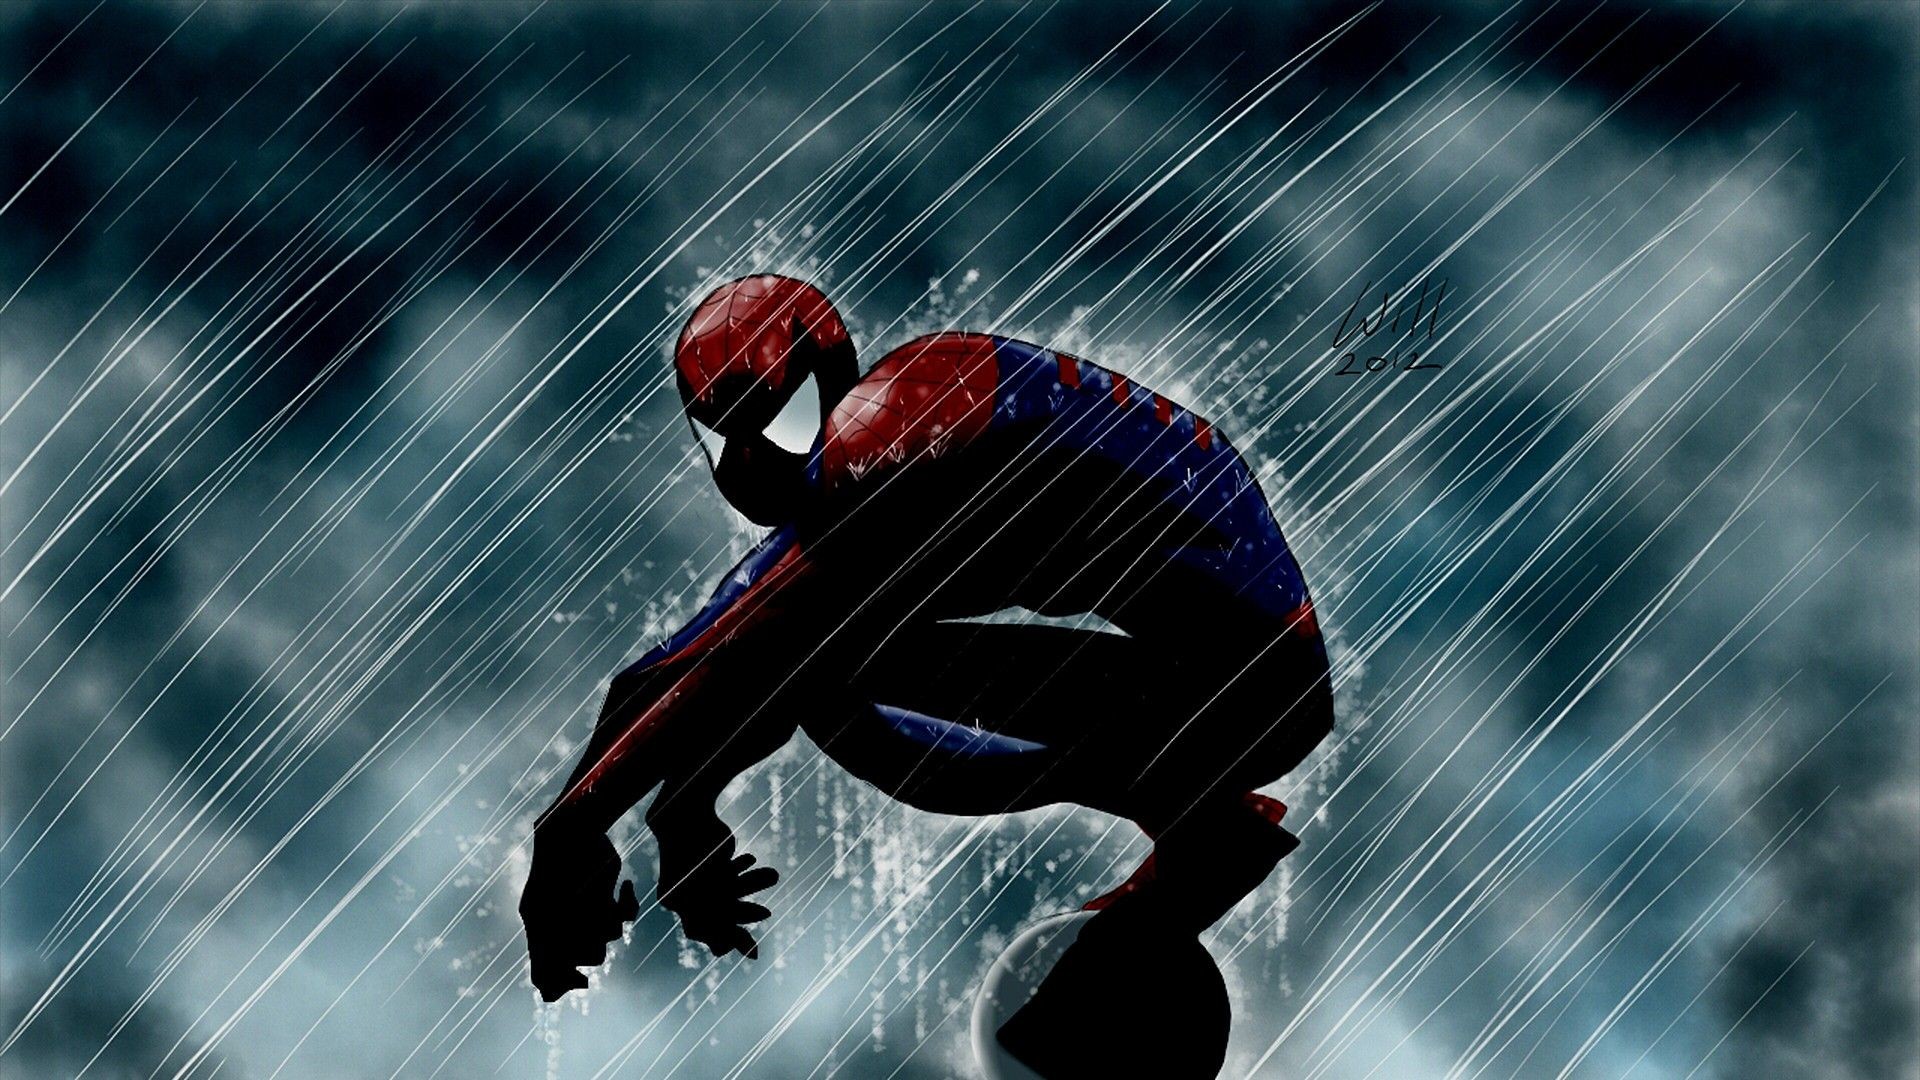 Awesome dramatic Spiderman in the rain wallpaper 1920×1080